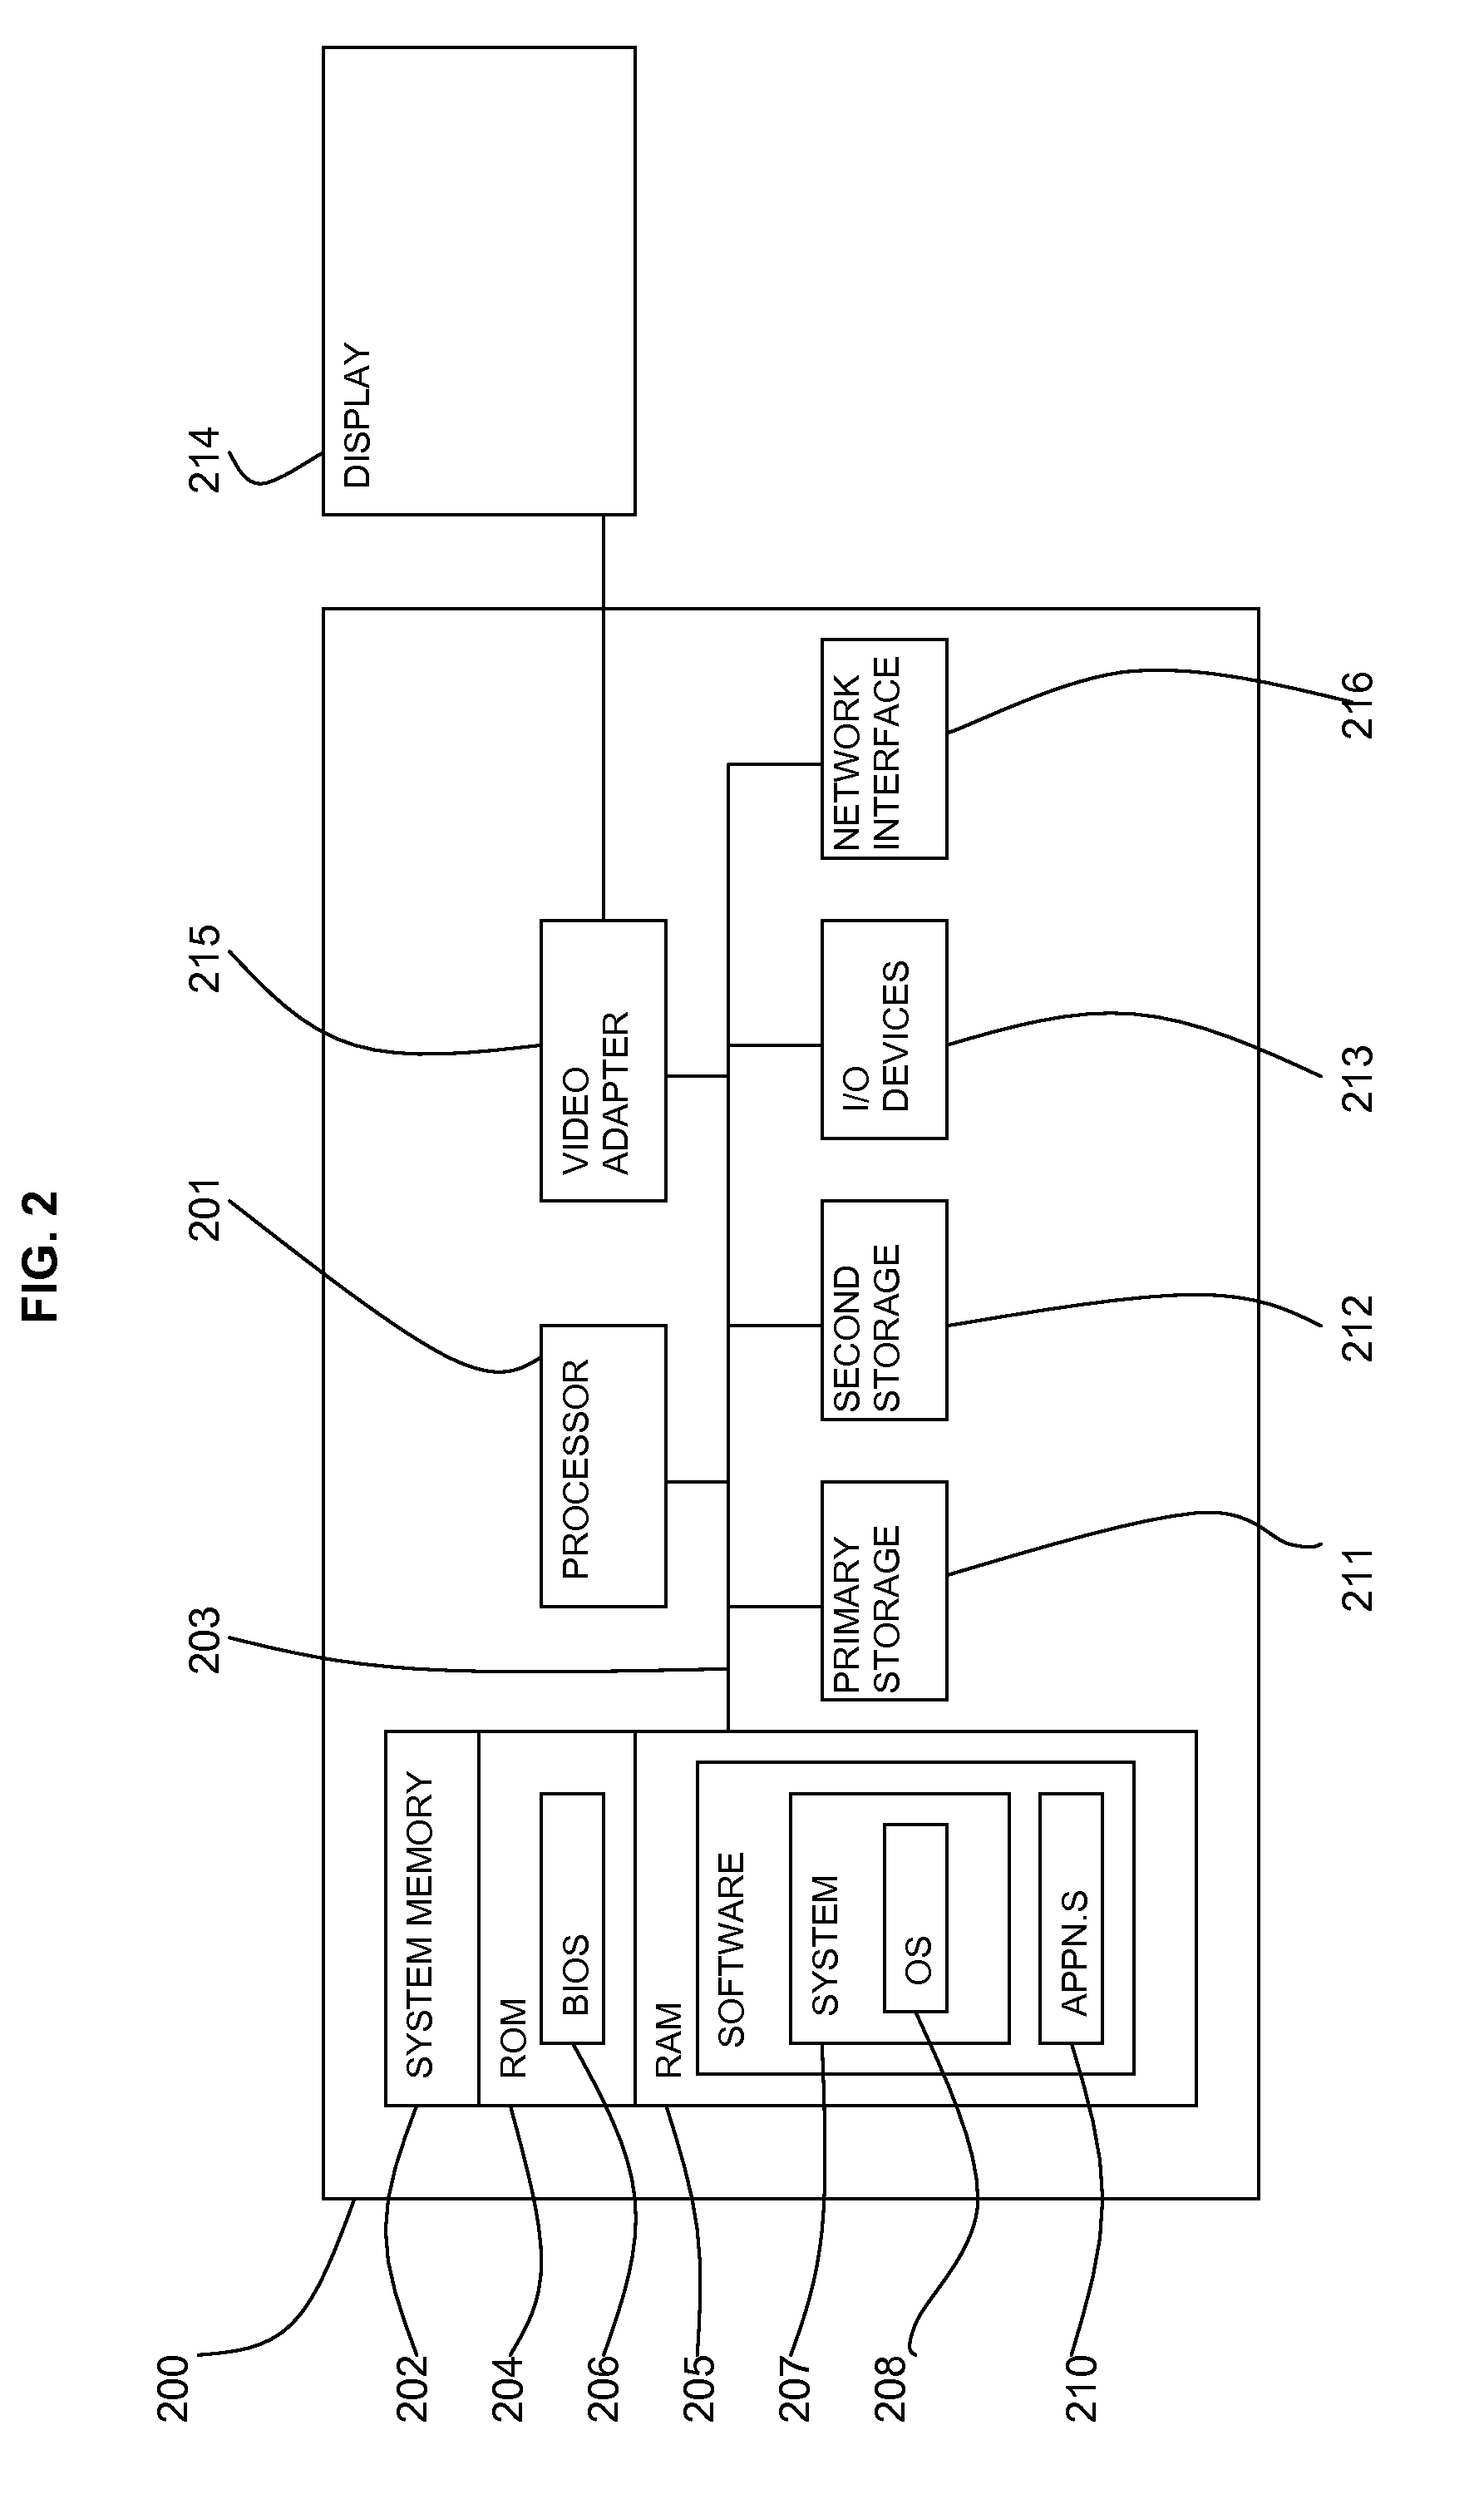 Method and System for In-doubt Resolution in Transaction Processing